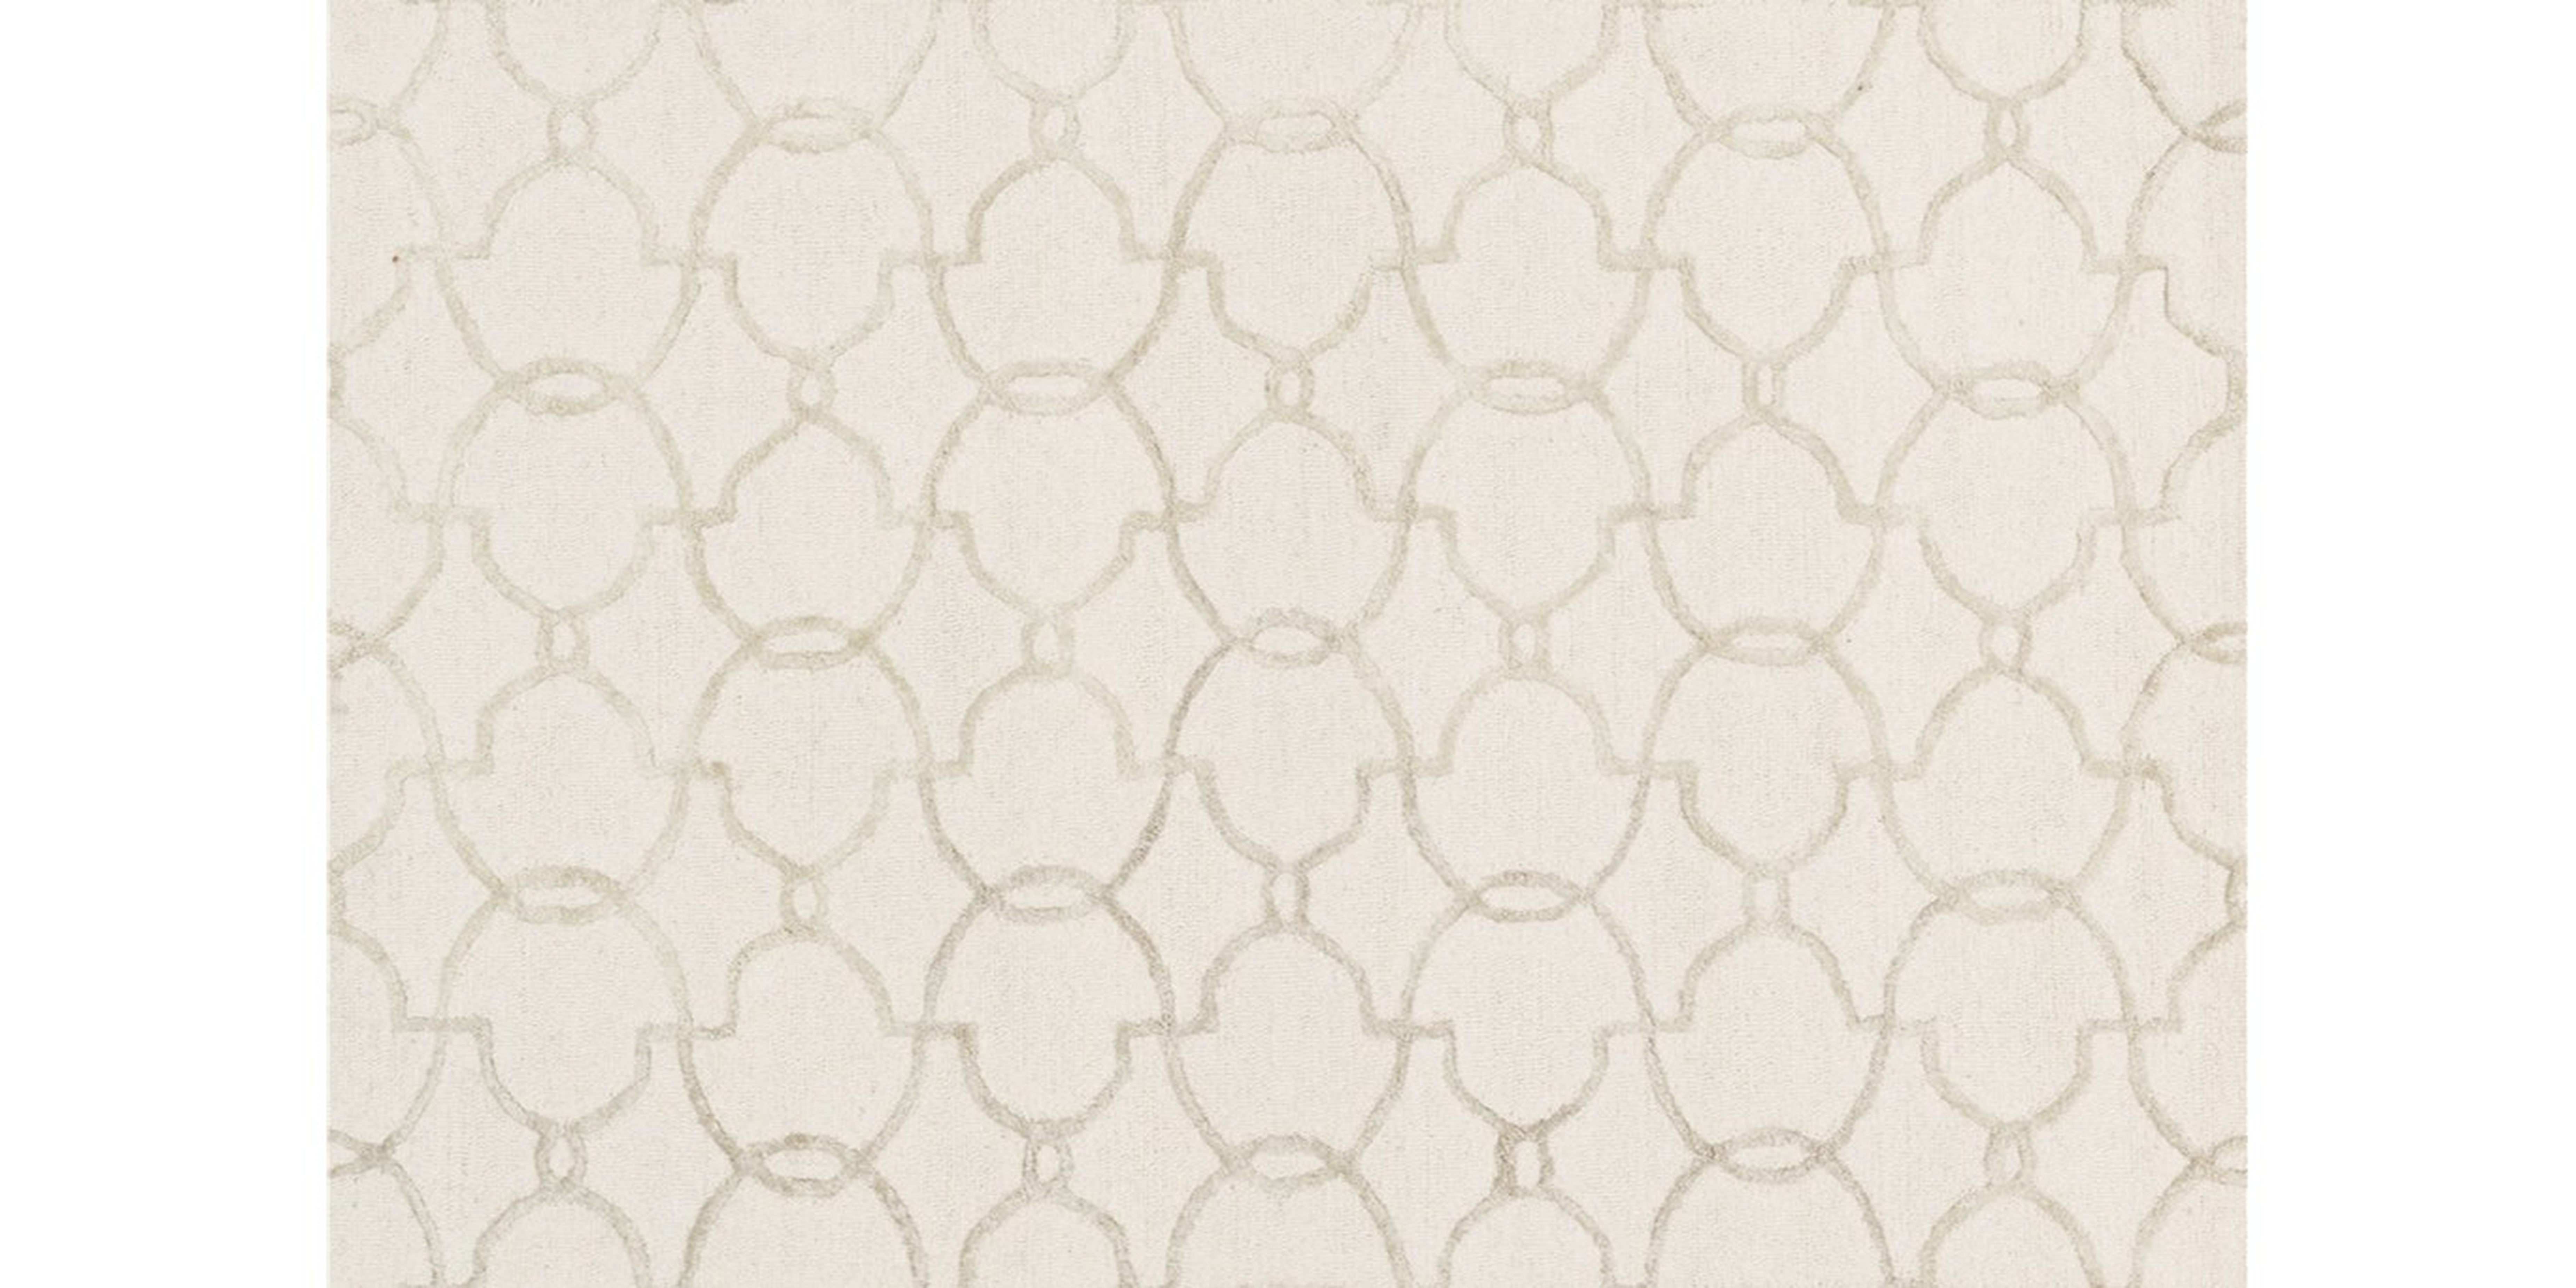 PC-04 Ivory/ Silver Rug - 5 'x 7'6" - Loloi Rugs